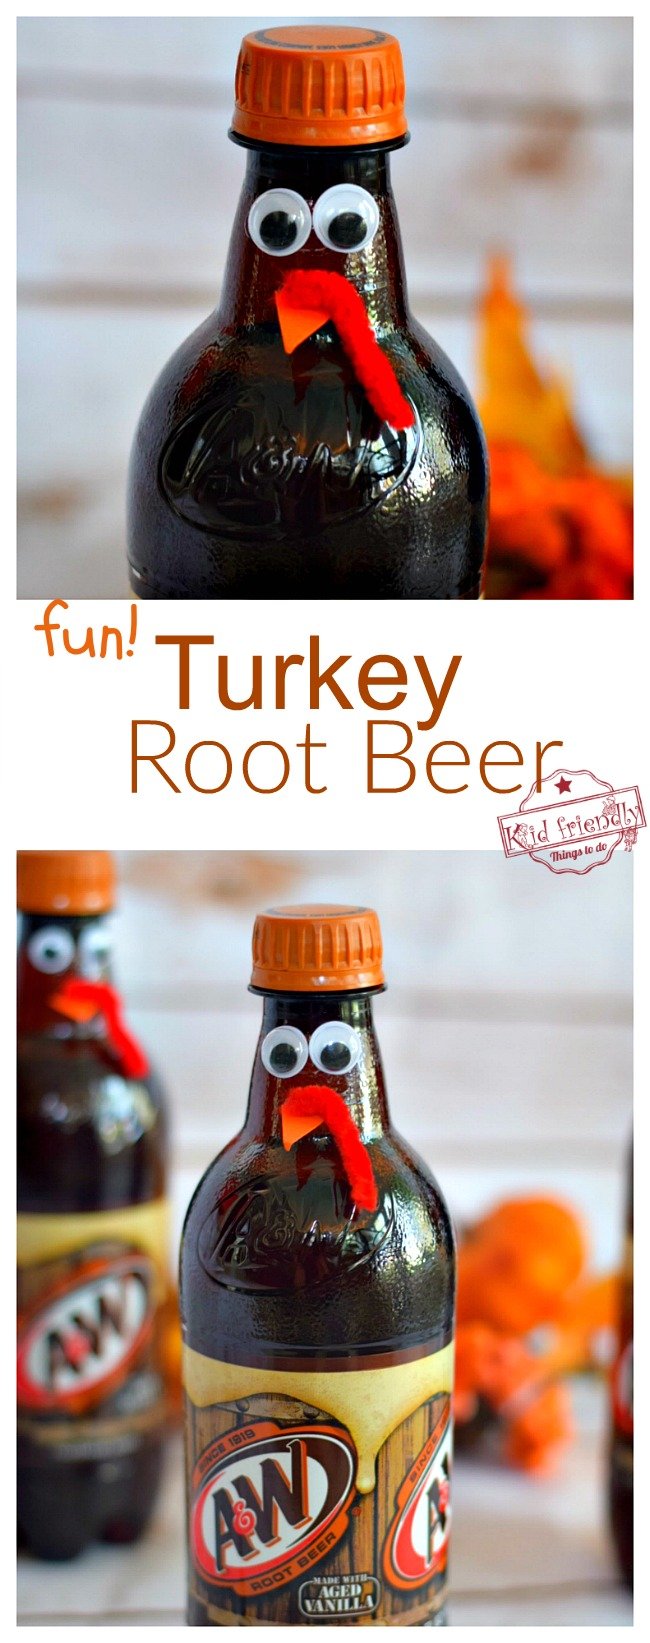 Fun Turkey Root Beer Thanksgiving Drink - Cute Fun Food Craft for the Table - fun for kids, teens and adults. - www.kidfriendlythingstodo.com